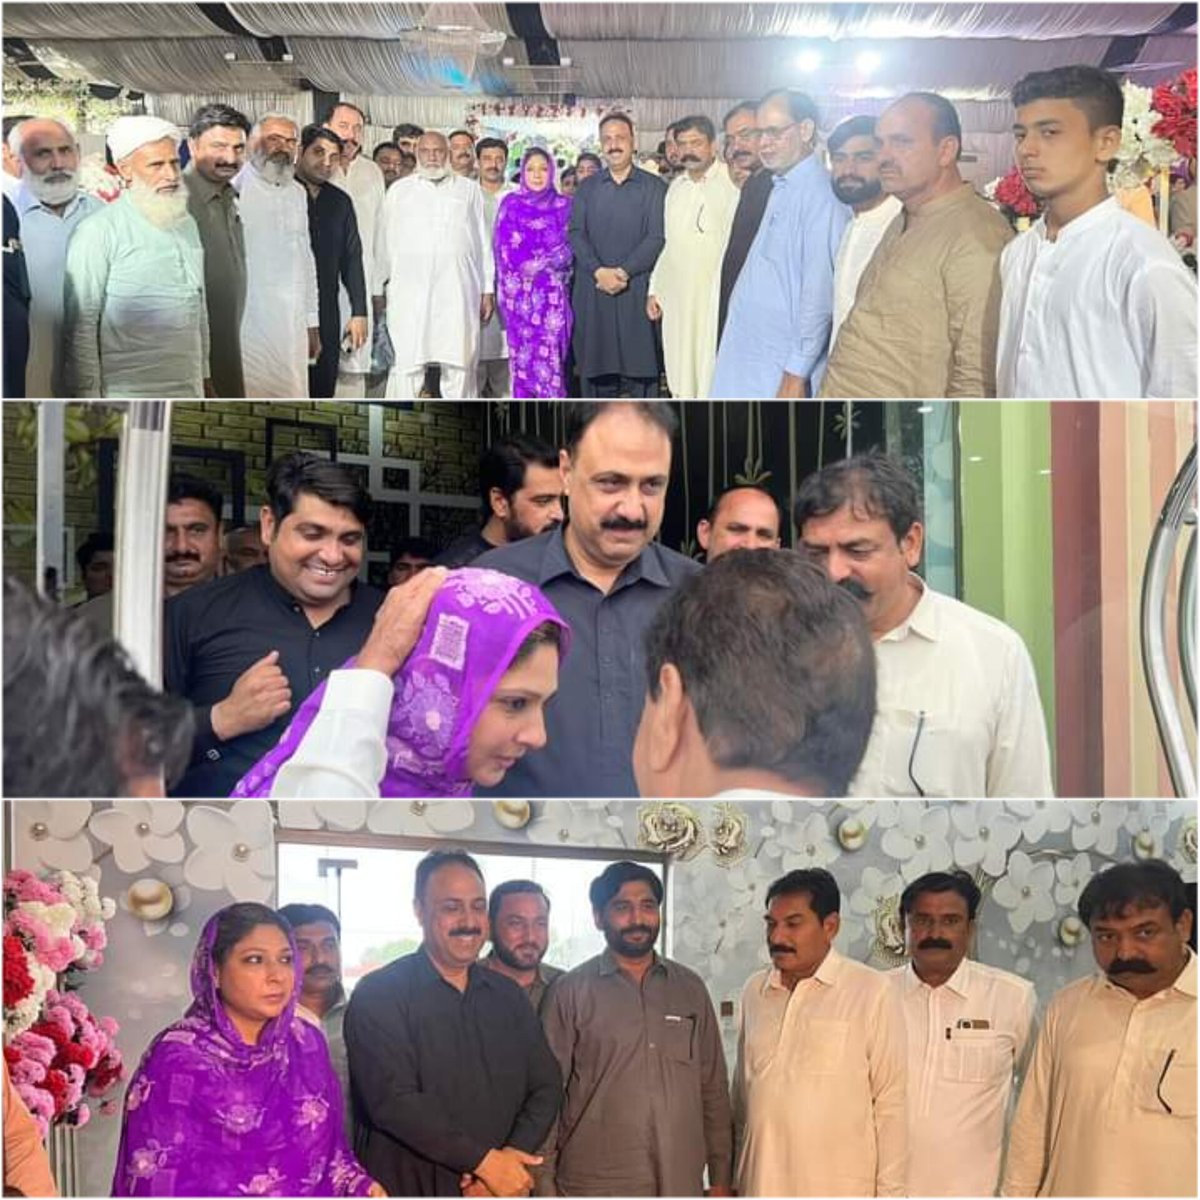 #NA142 #Lodhi_Group Attending the wedding of daughter of Harappa @AyeshaArshadKh2 of Yasin Jatt 103/7 R. She expressed prayers and good wishes for the bride